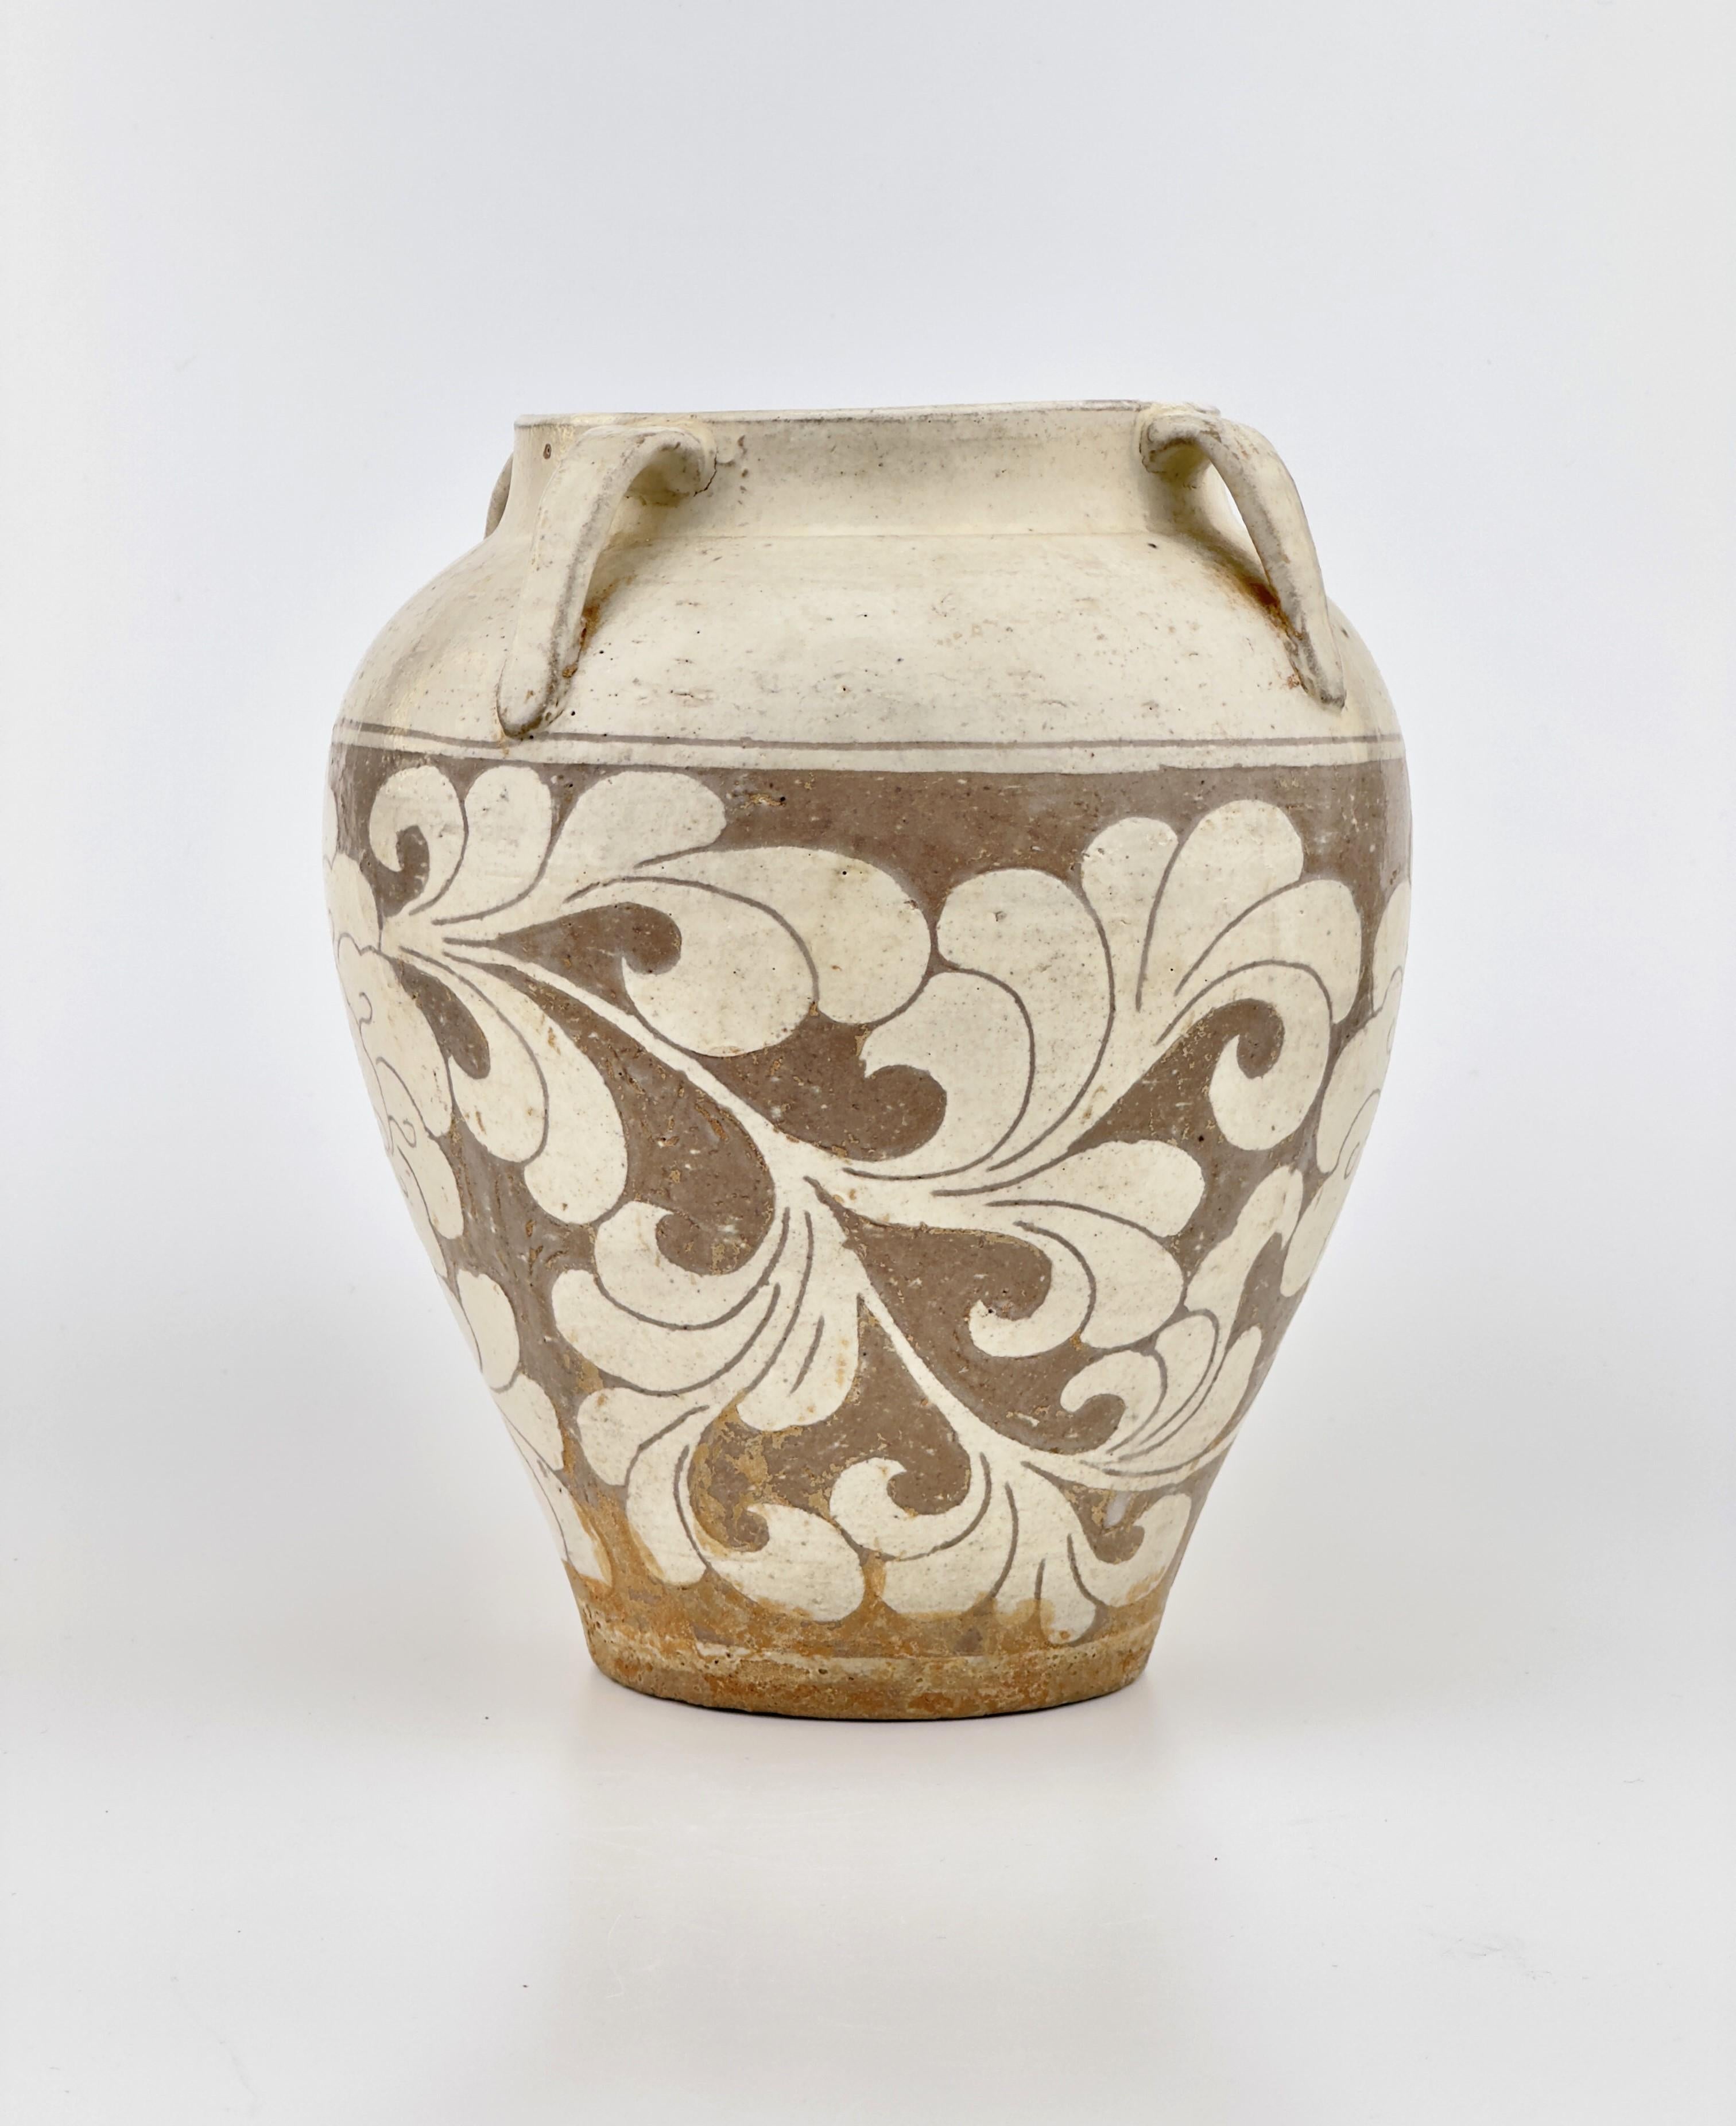 This jar features a carved design, which is typical of Cizhou ware. It has a creamy white and brown color scheme, and the prominent decoration of lotus flower, which is a common motif in Chinese art and culture, symbolizing purity and enlightenment.